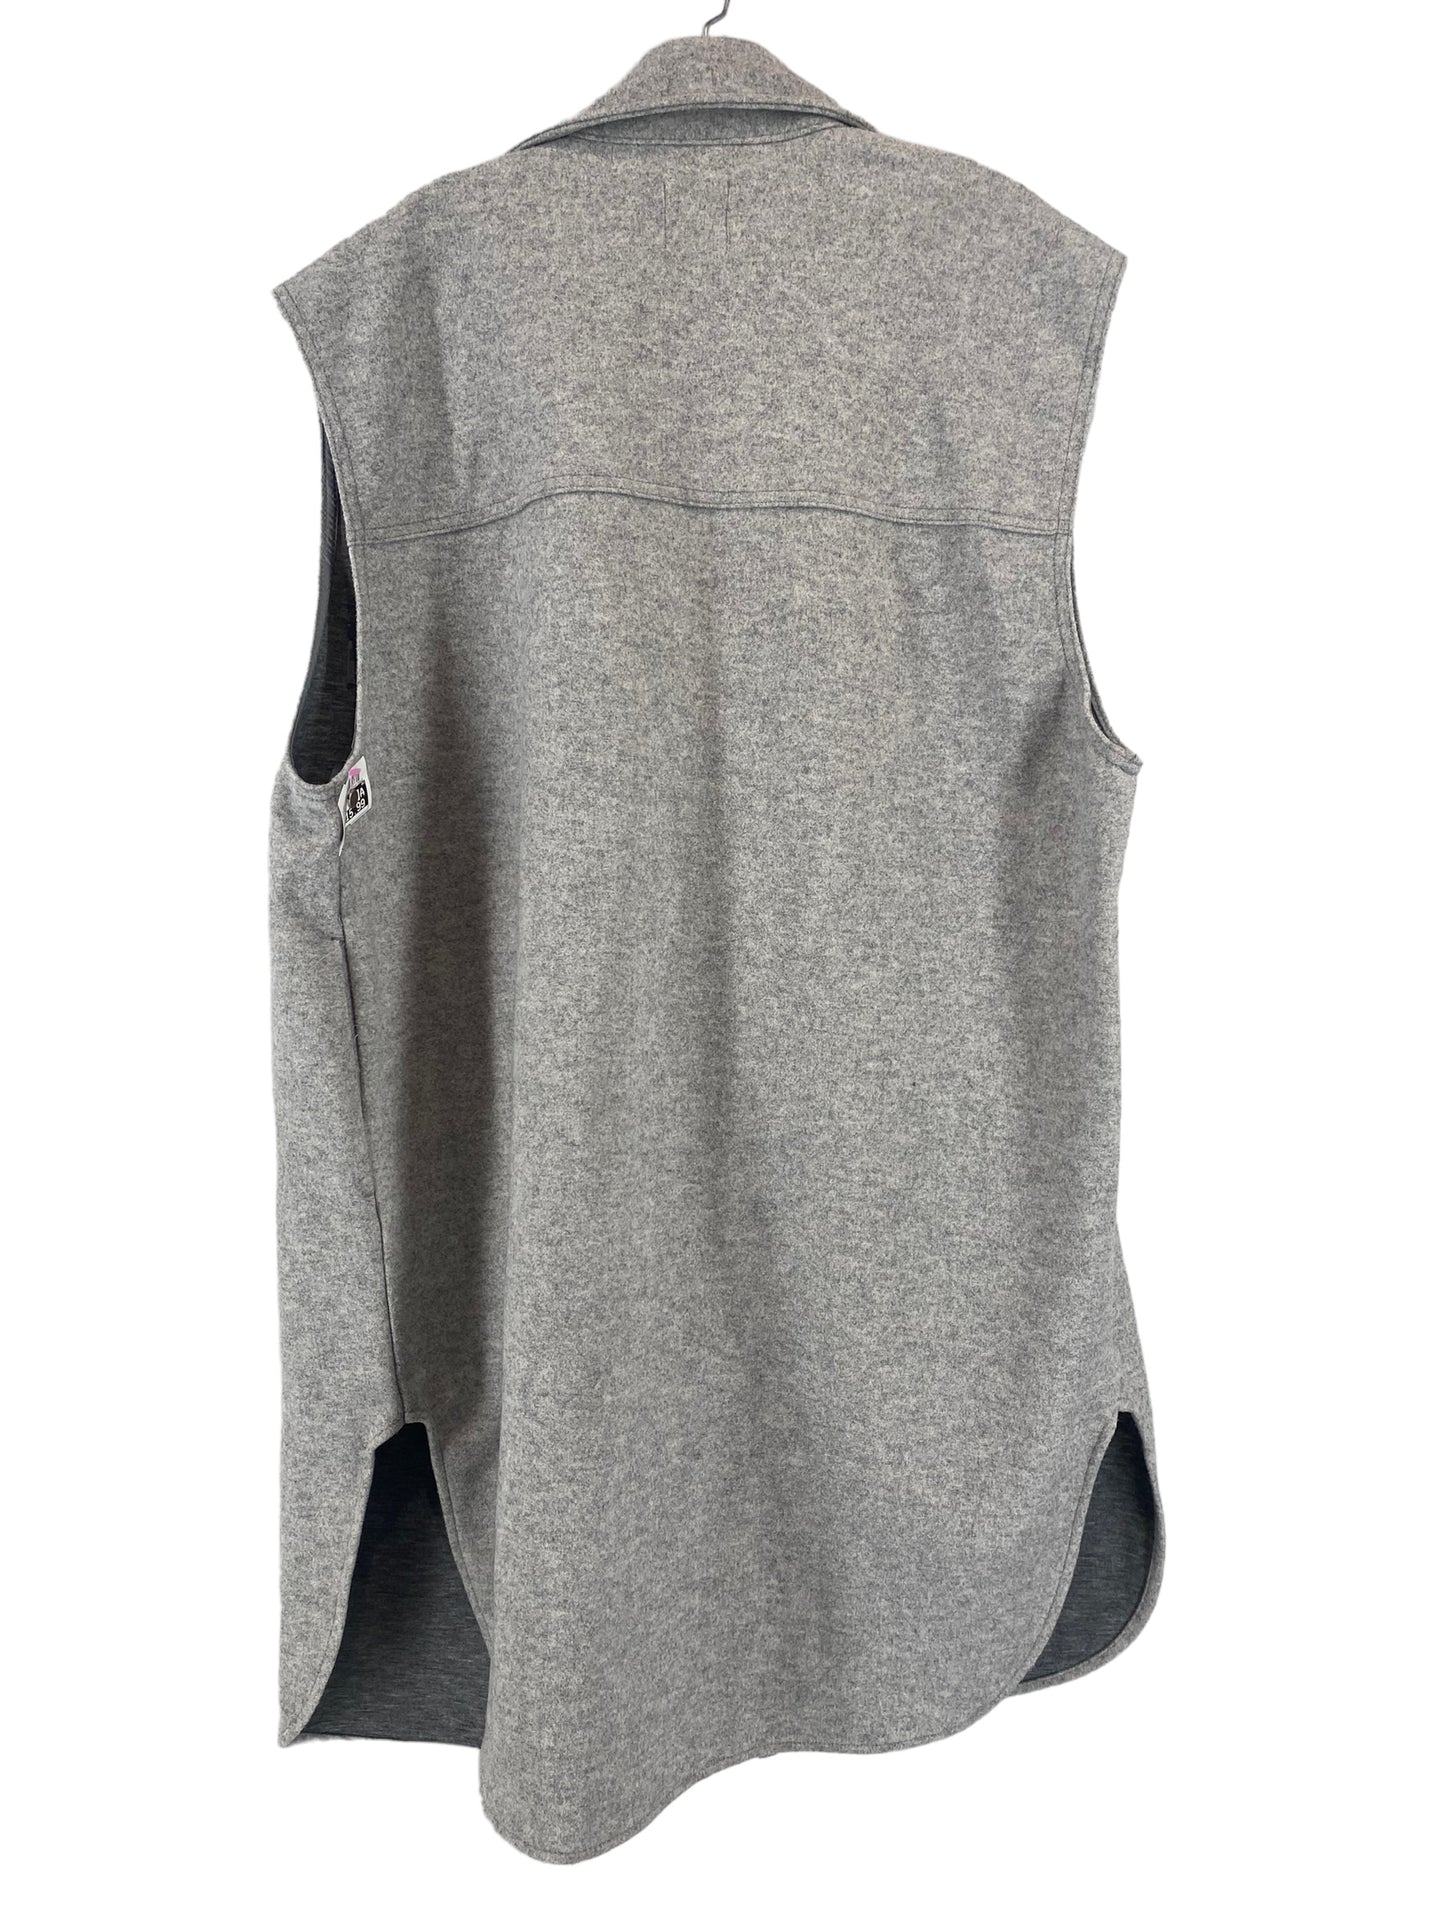 Vest Other By H&m  Size: M